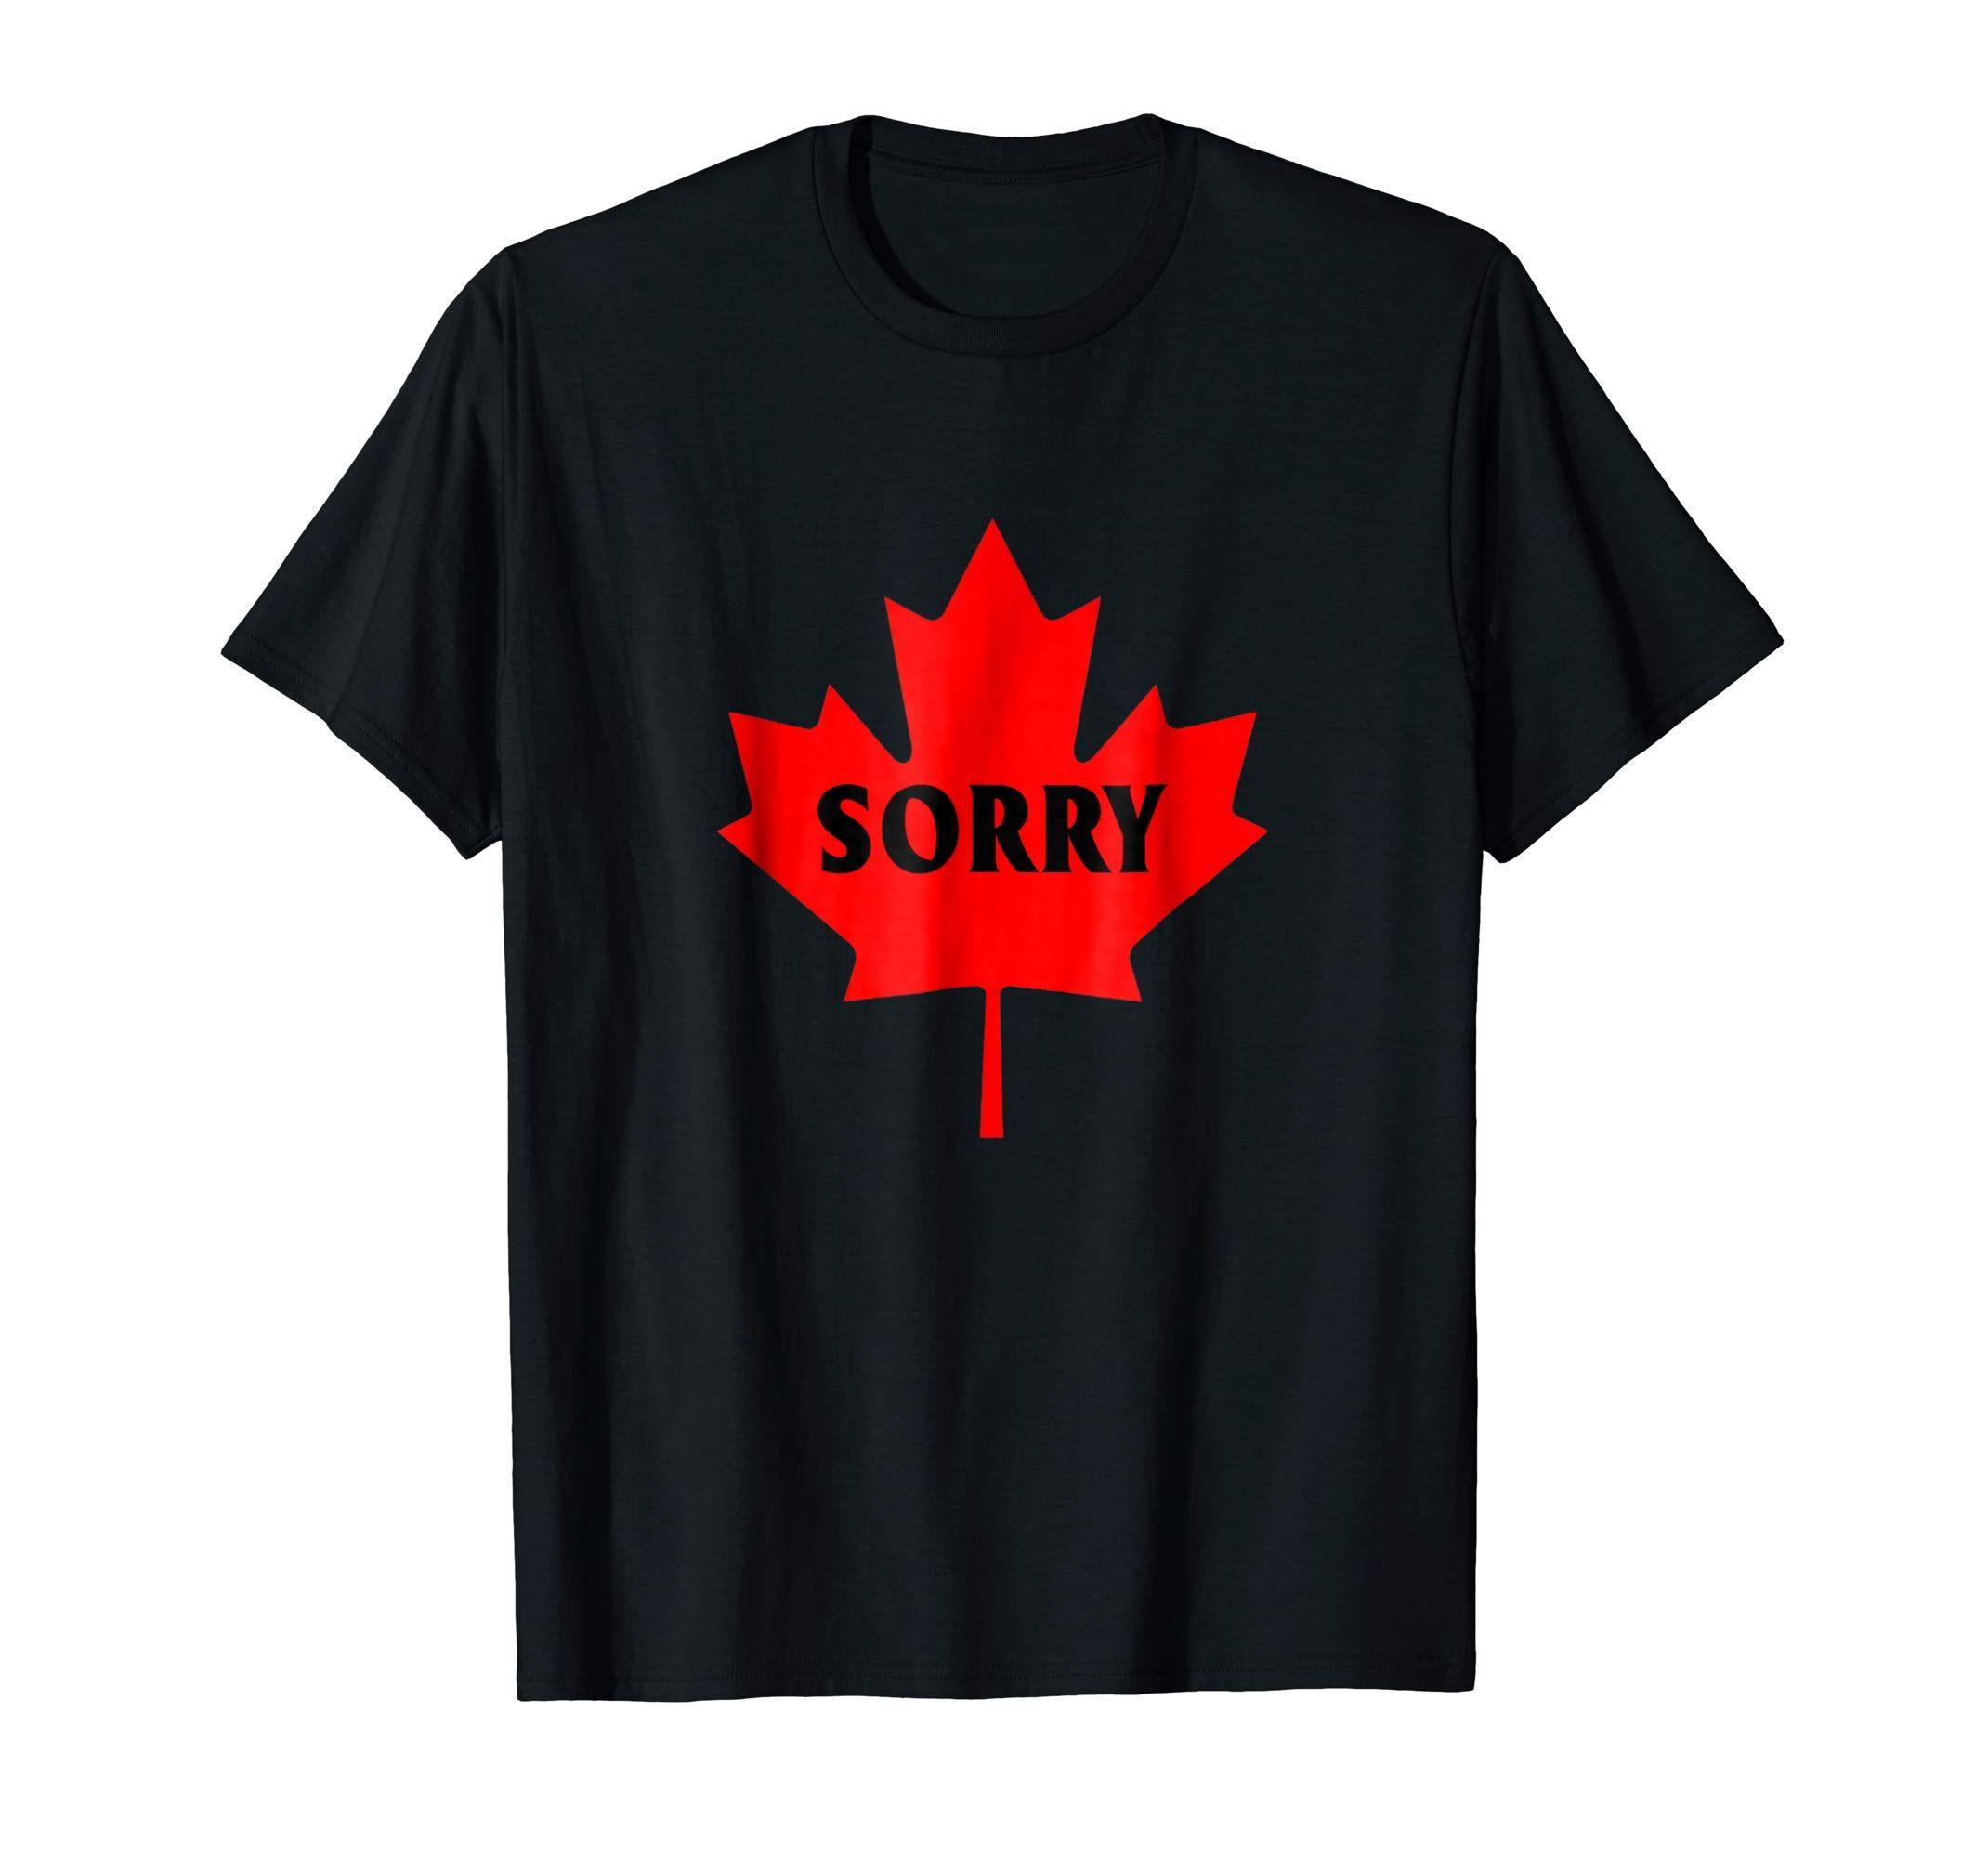 Red Maple Leaf of a Word Logo - Red Maple Leaf Flag With Word Sorry Shirt Canada